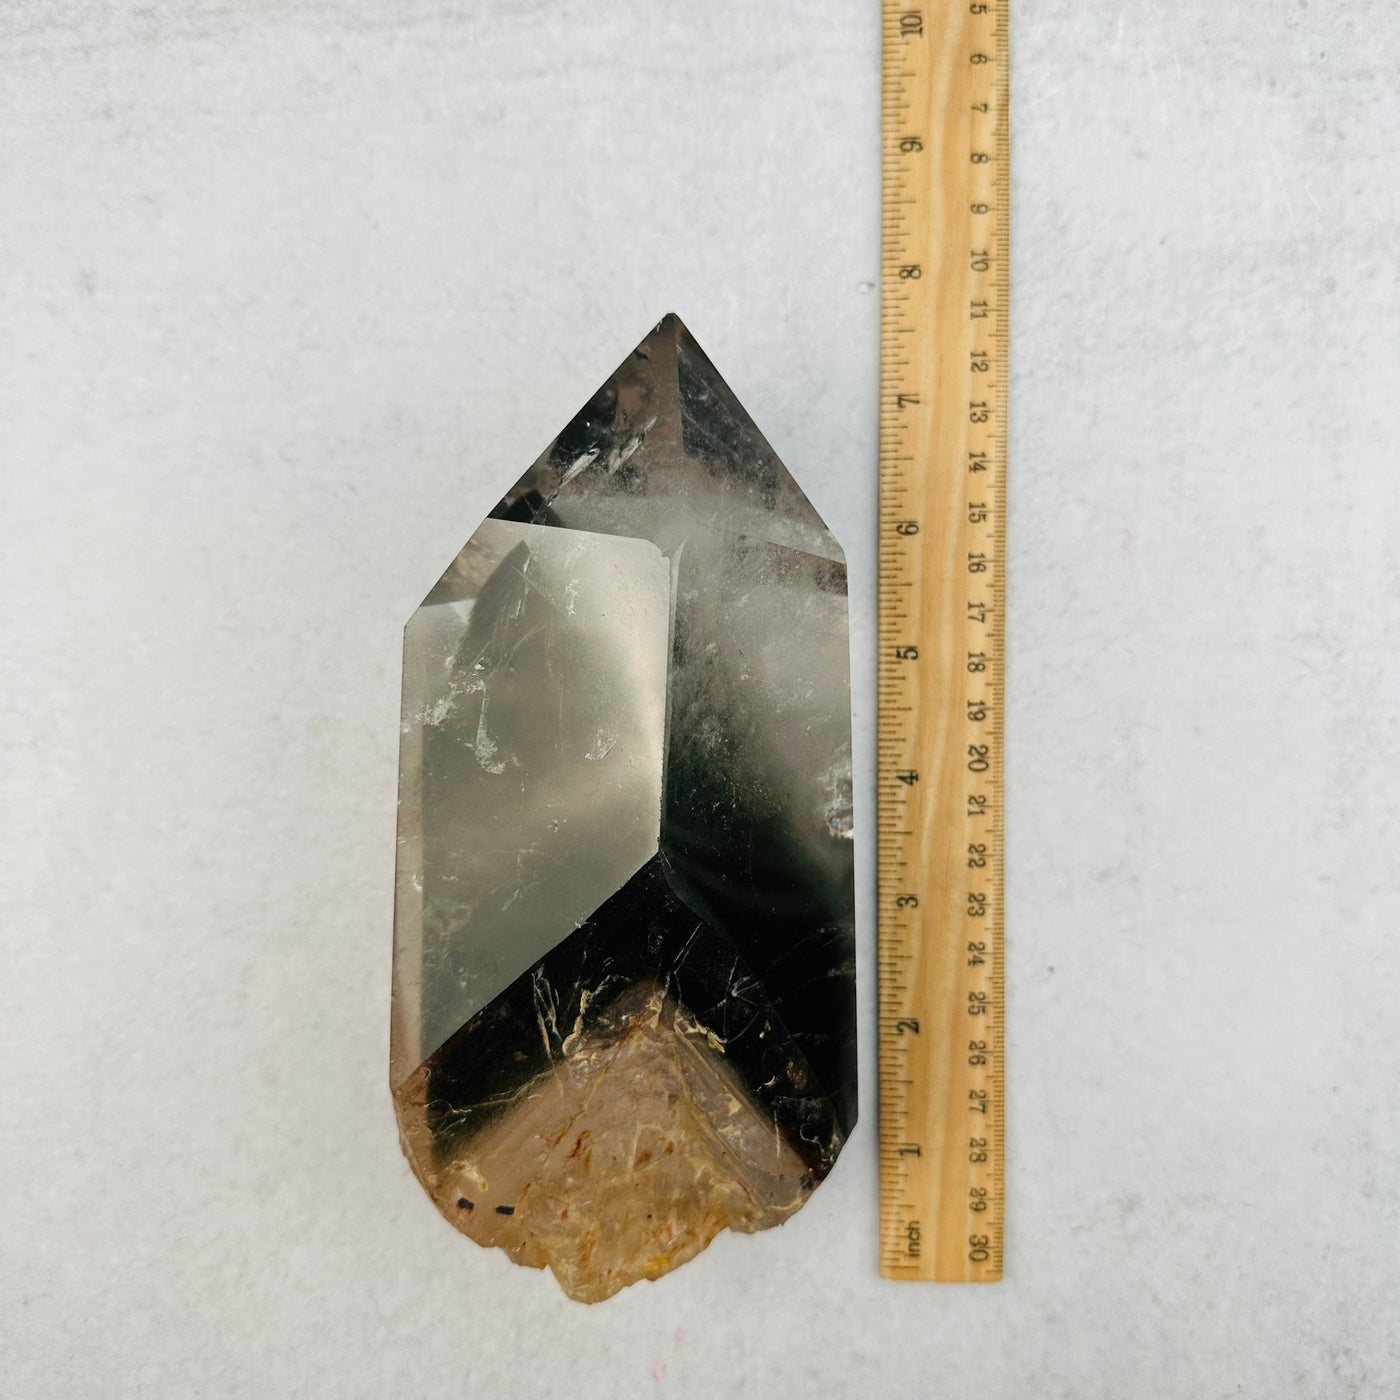 lodolite quartz point next to a ruler for size reference 